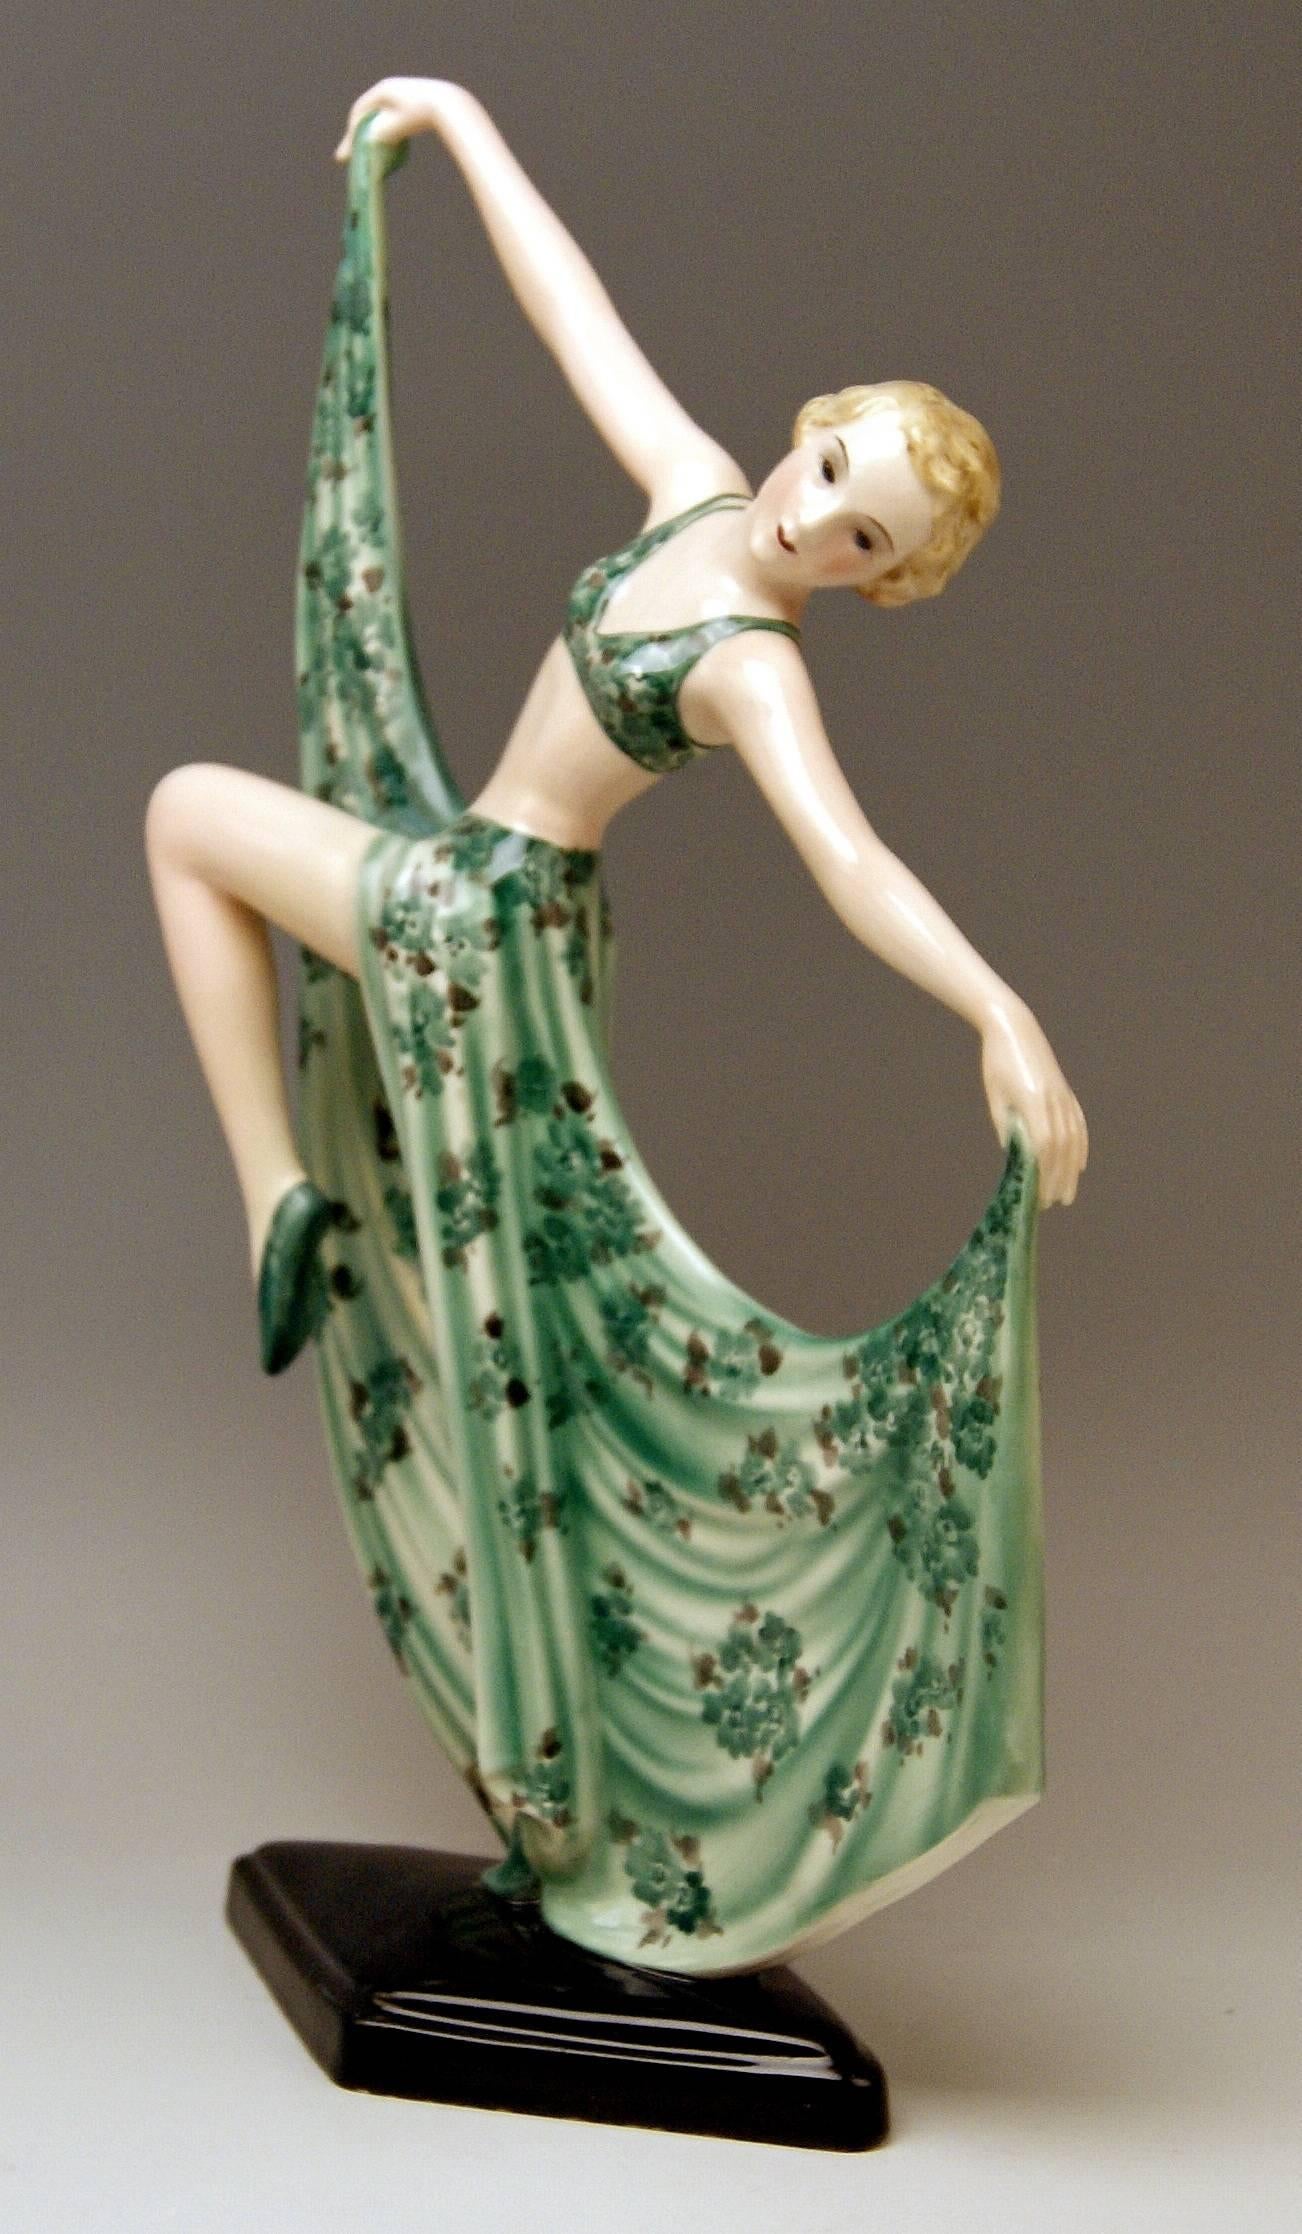 Semi-nude Art Deco lady dancer seizing corners of her skirt.
Model 7053

Size: 
height 15.2 inches (38.0 cm)
width 9.055 inches (23.0 cm)
depth 4.33 inches (11.0 cm)

Made by:
Goldscheider Vienna / manufactured circa 1936/37
Designed